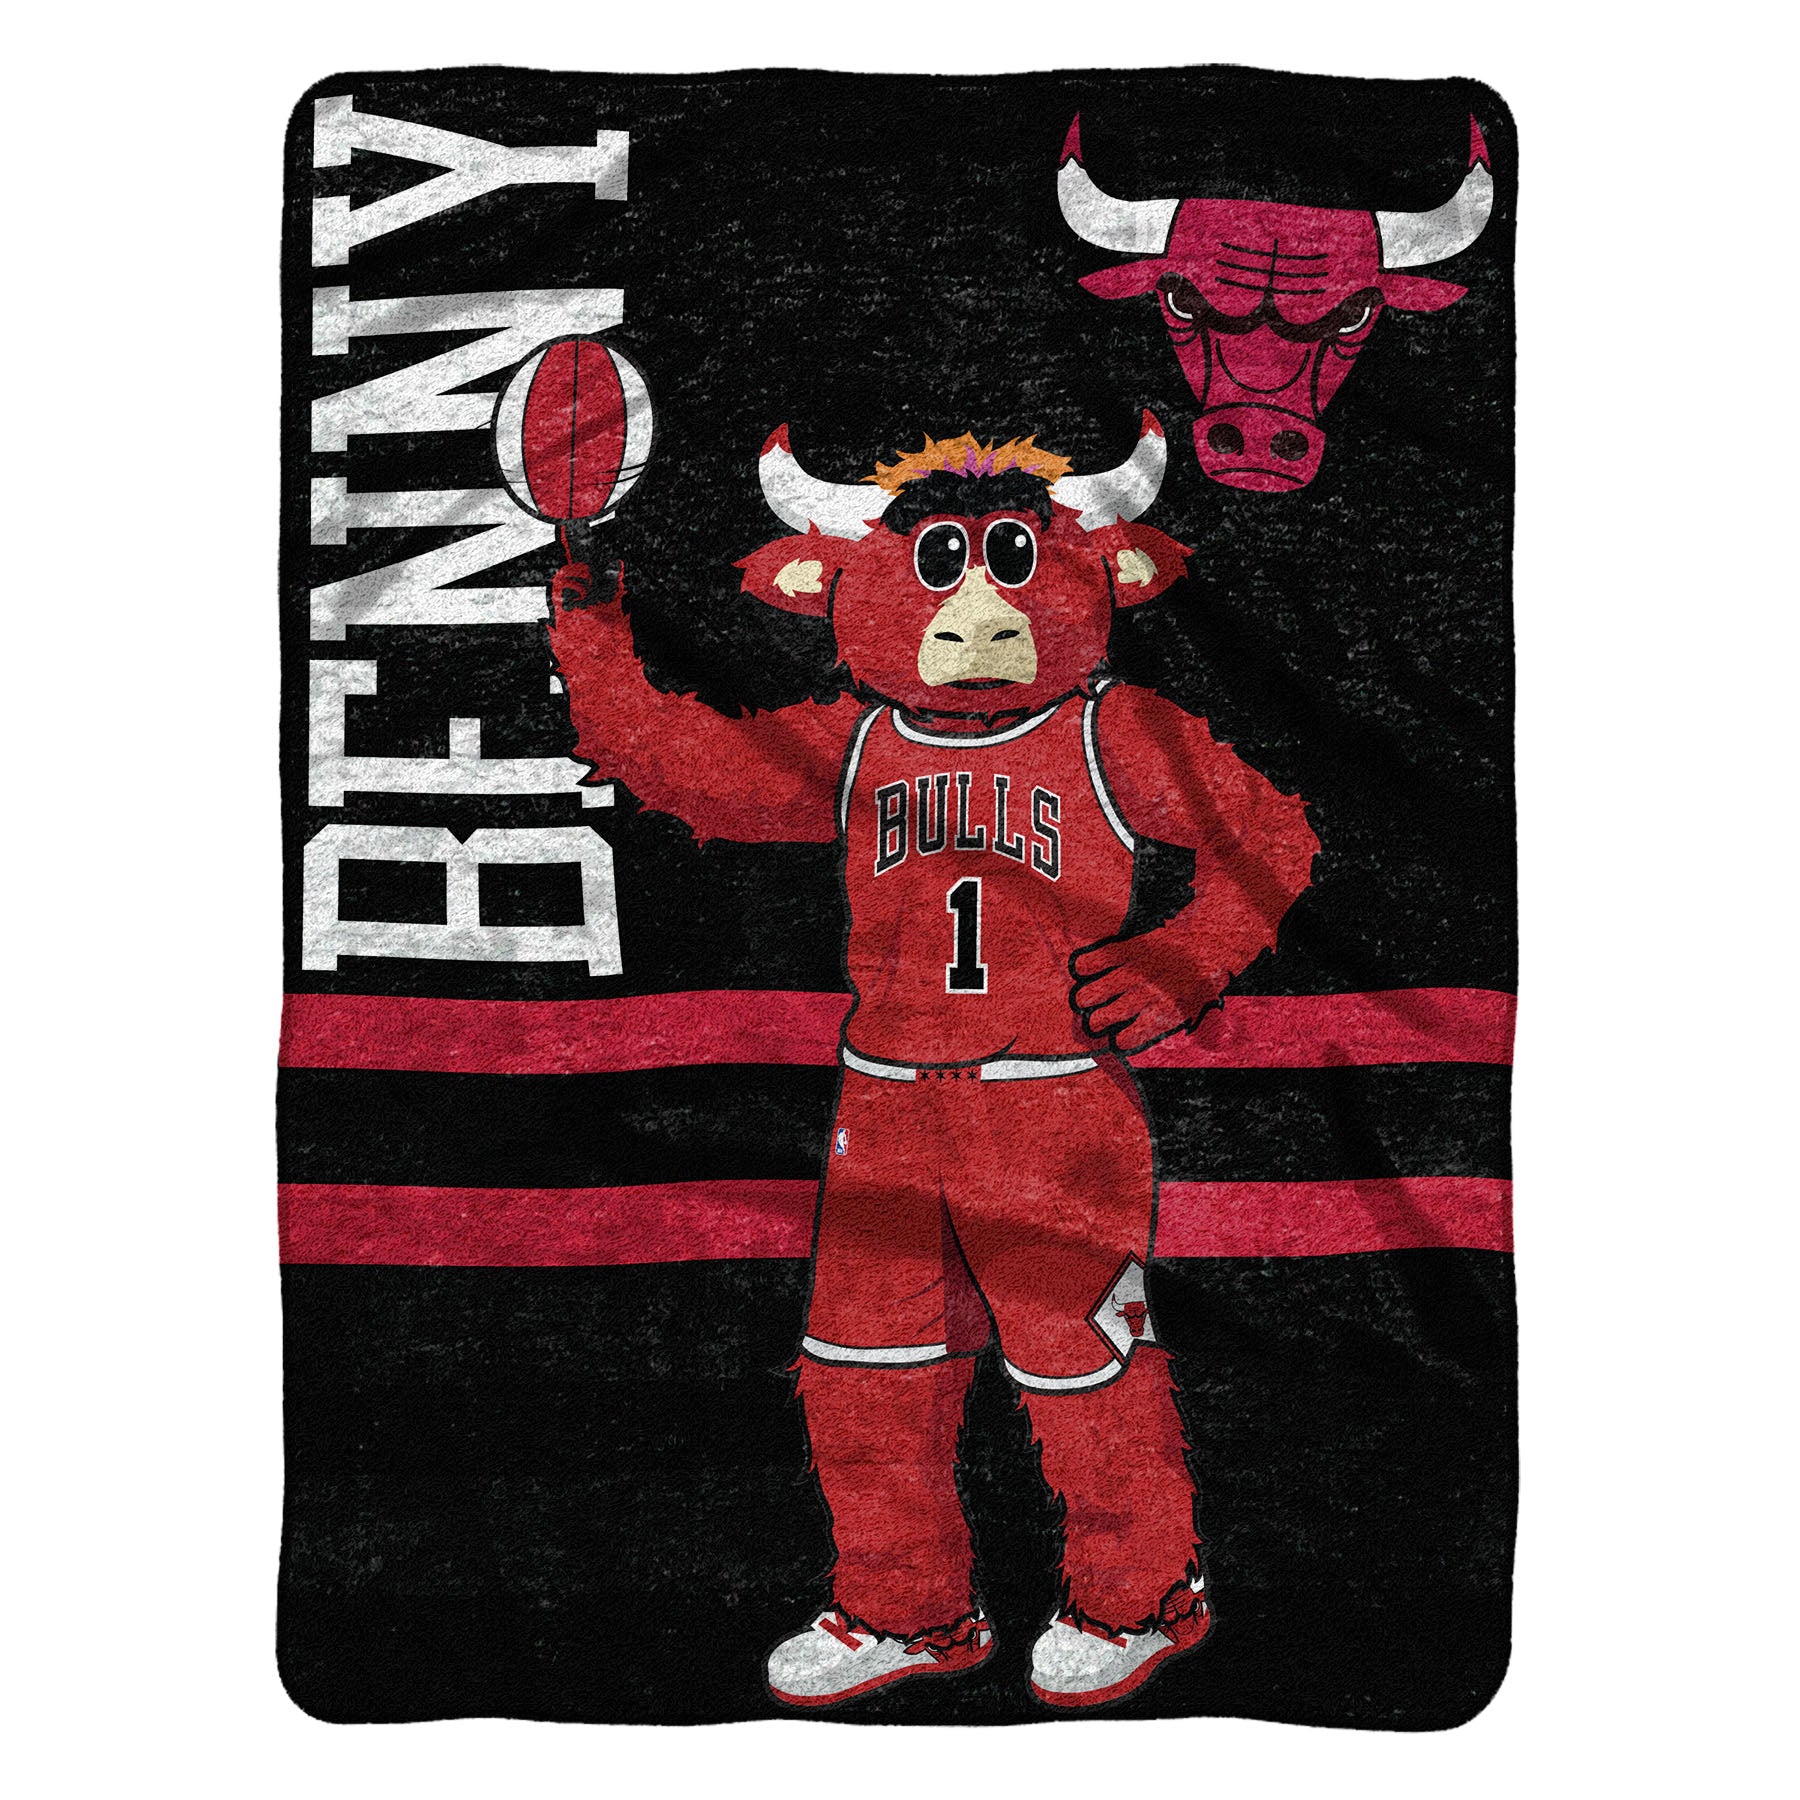 Ball State Cardinals Kids Game Day Red Plush Soft Minky Blanket 36 x 48 Mascot by Vive La Fete